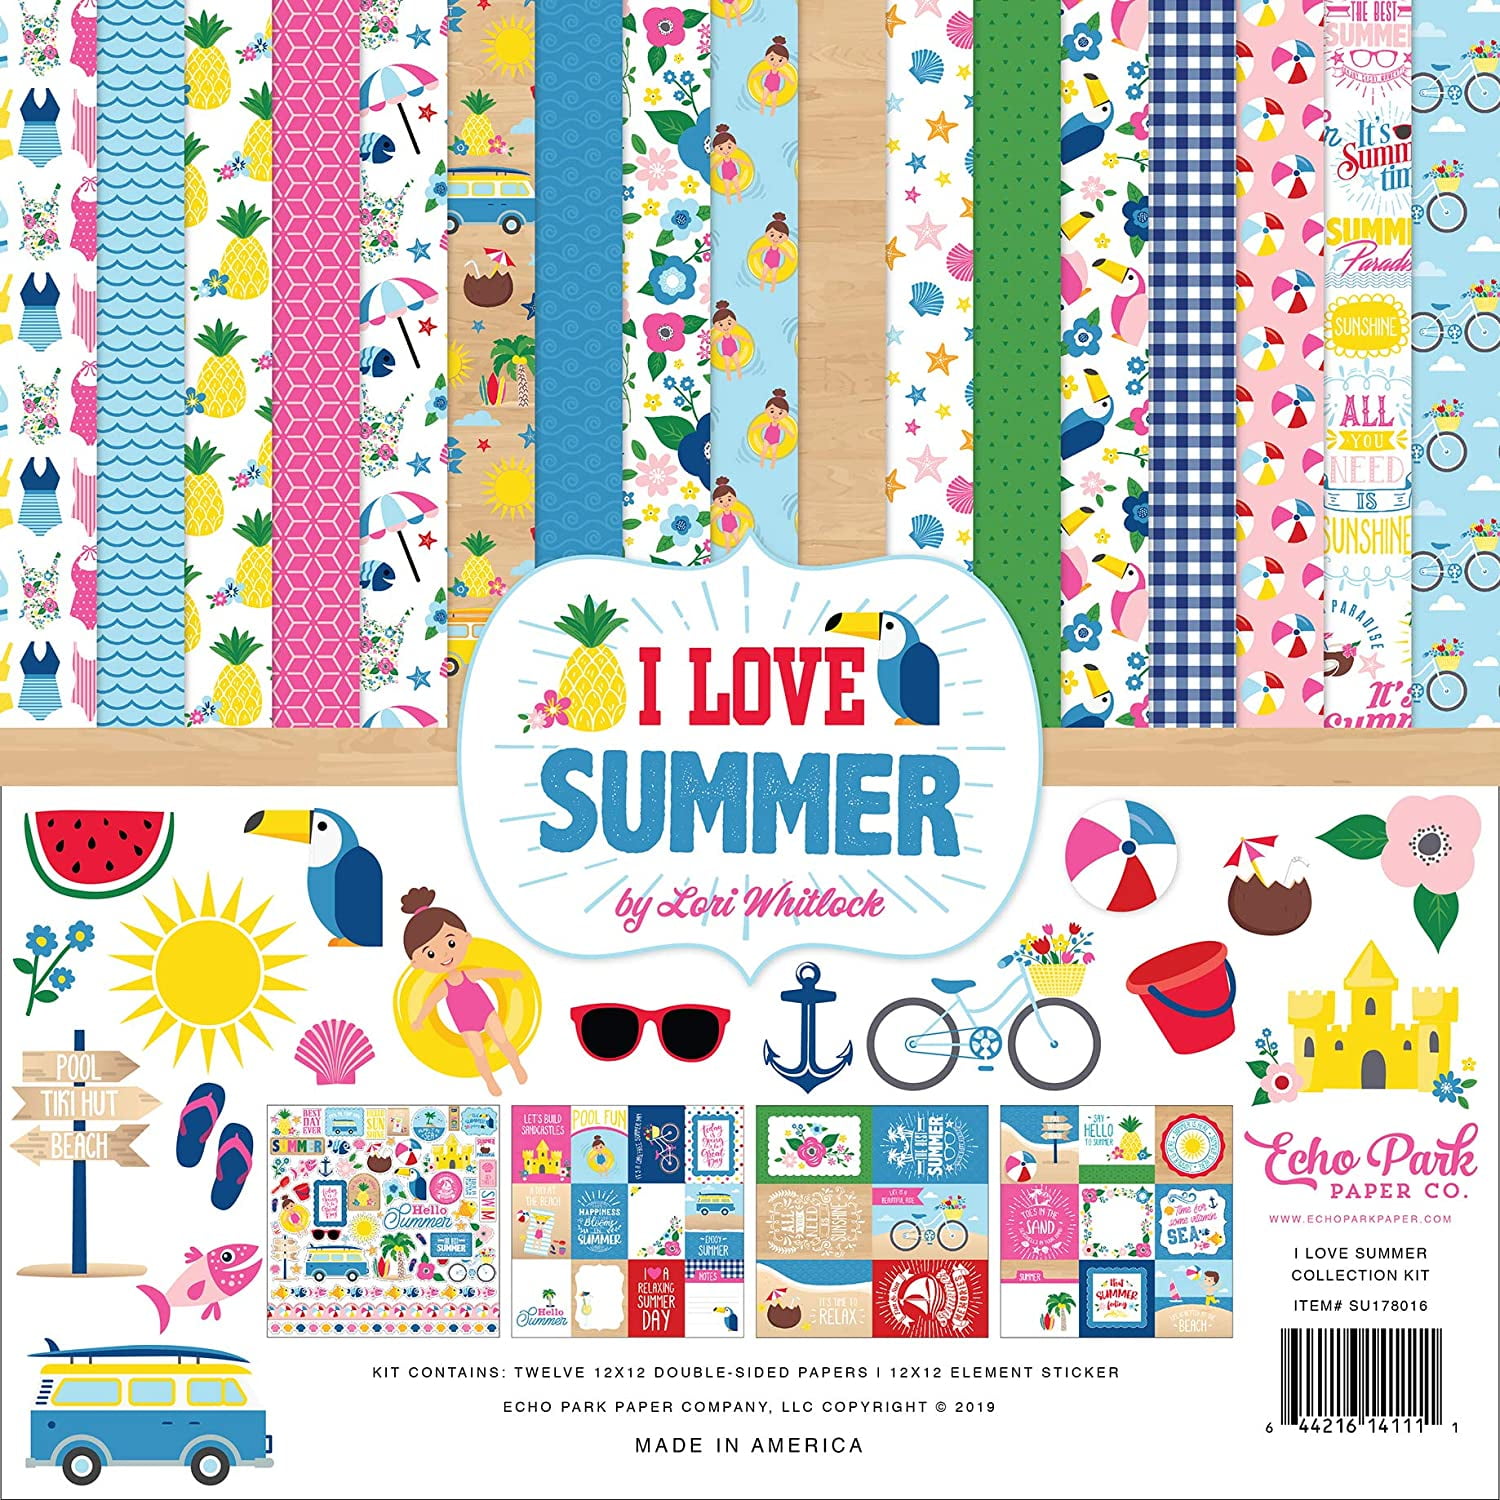 Green,Yellow Red Teal Blue ECHO PARK PAPER COMPANY I Love SUMMR COLL 12X12 KIT Pink One Size